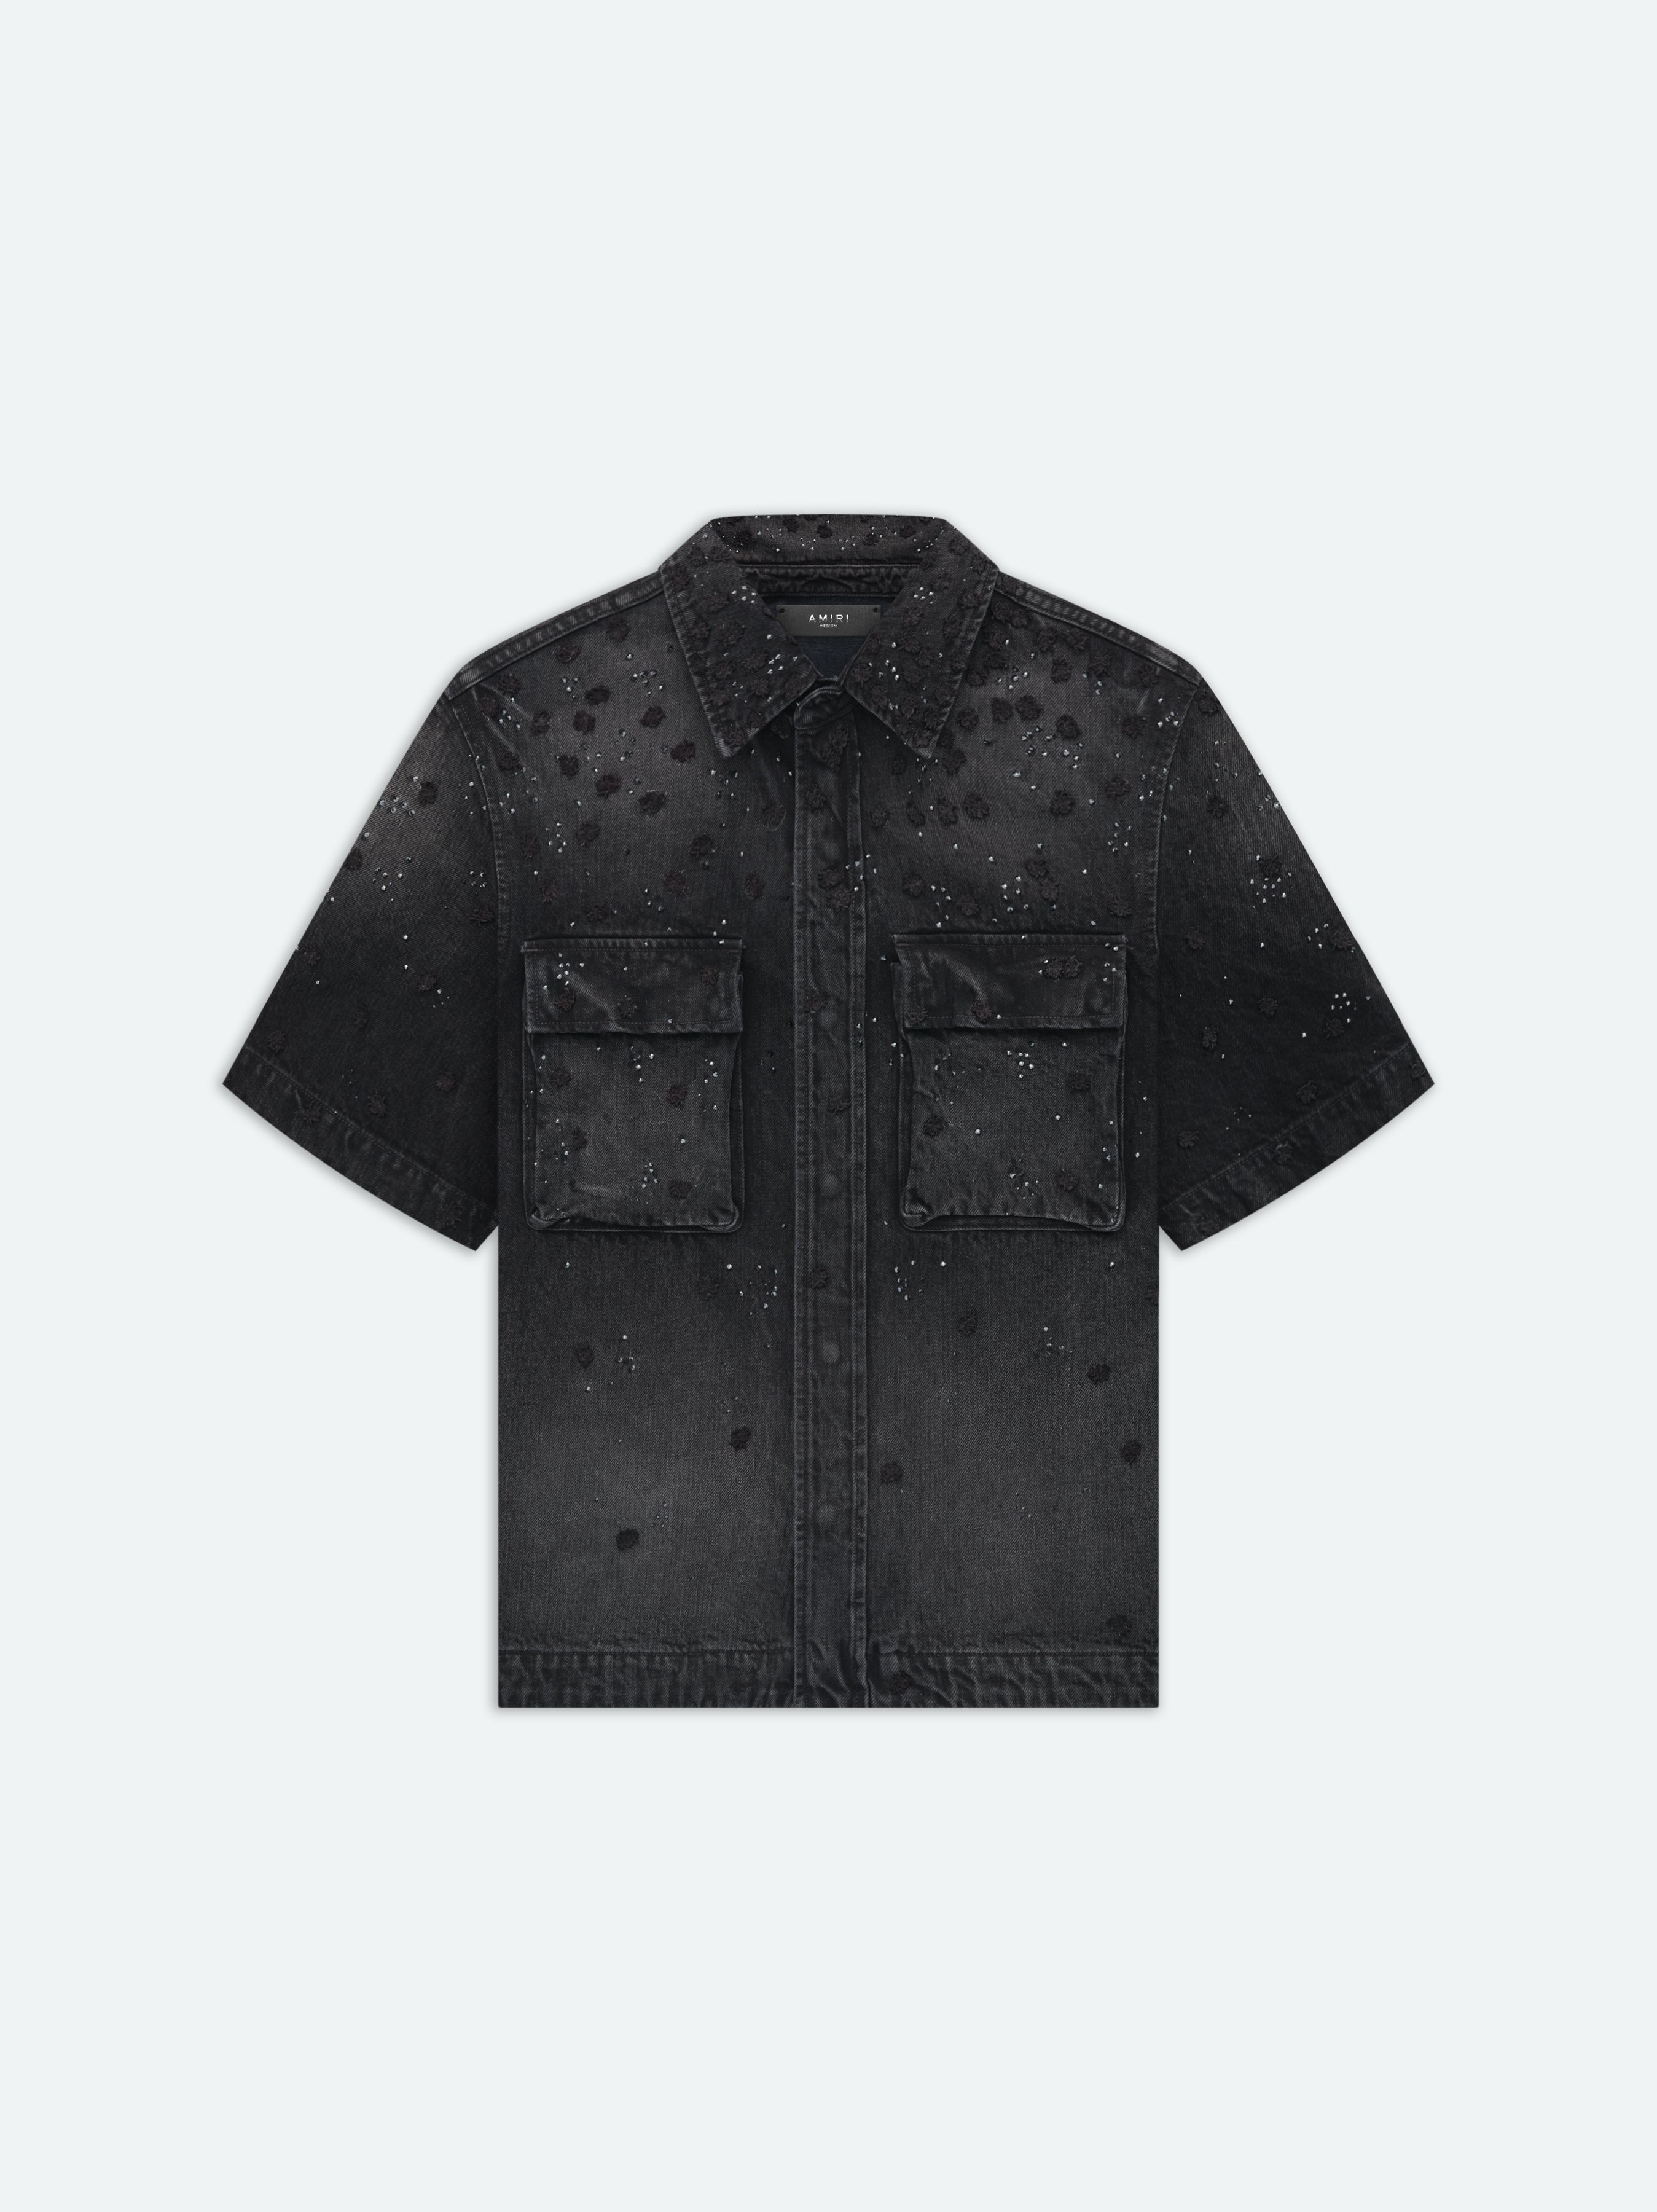 Product FLORAL CRYSTAL DENIM SHORT SLEEVE SHIRT - Faded Black featured image